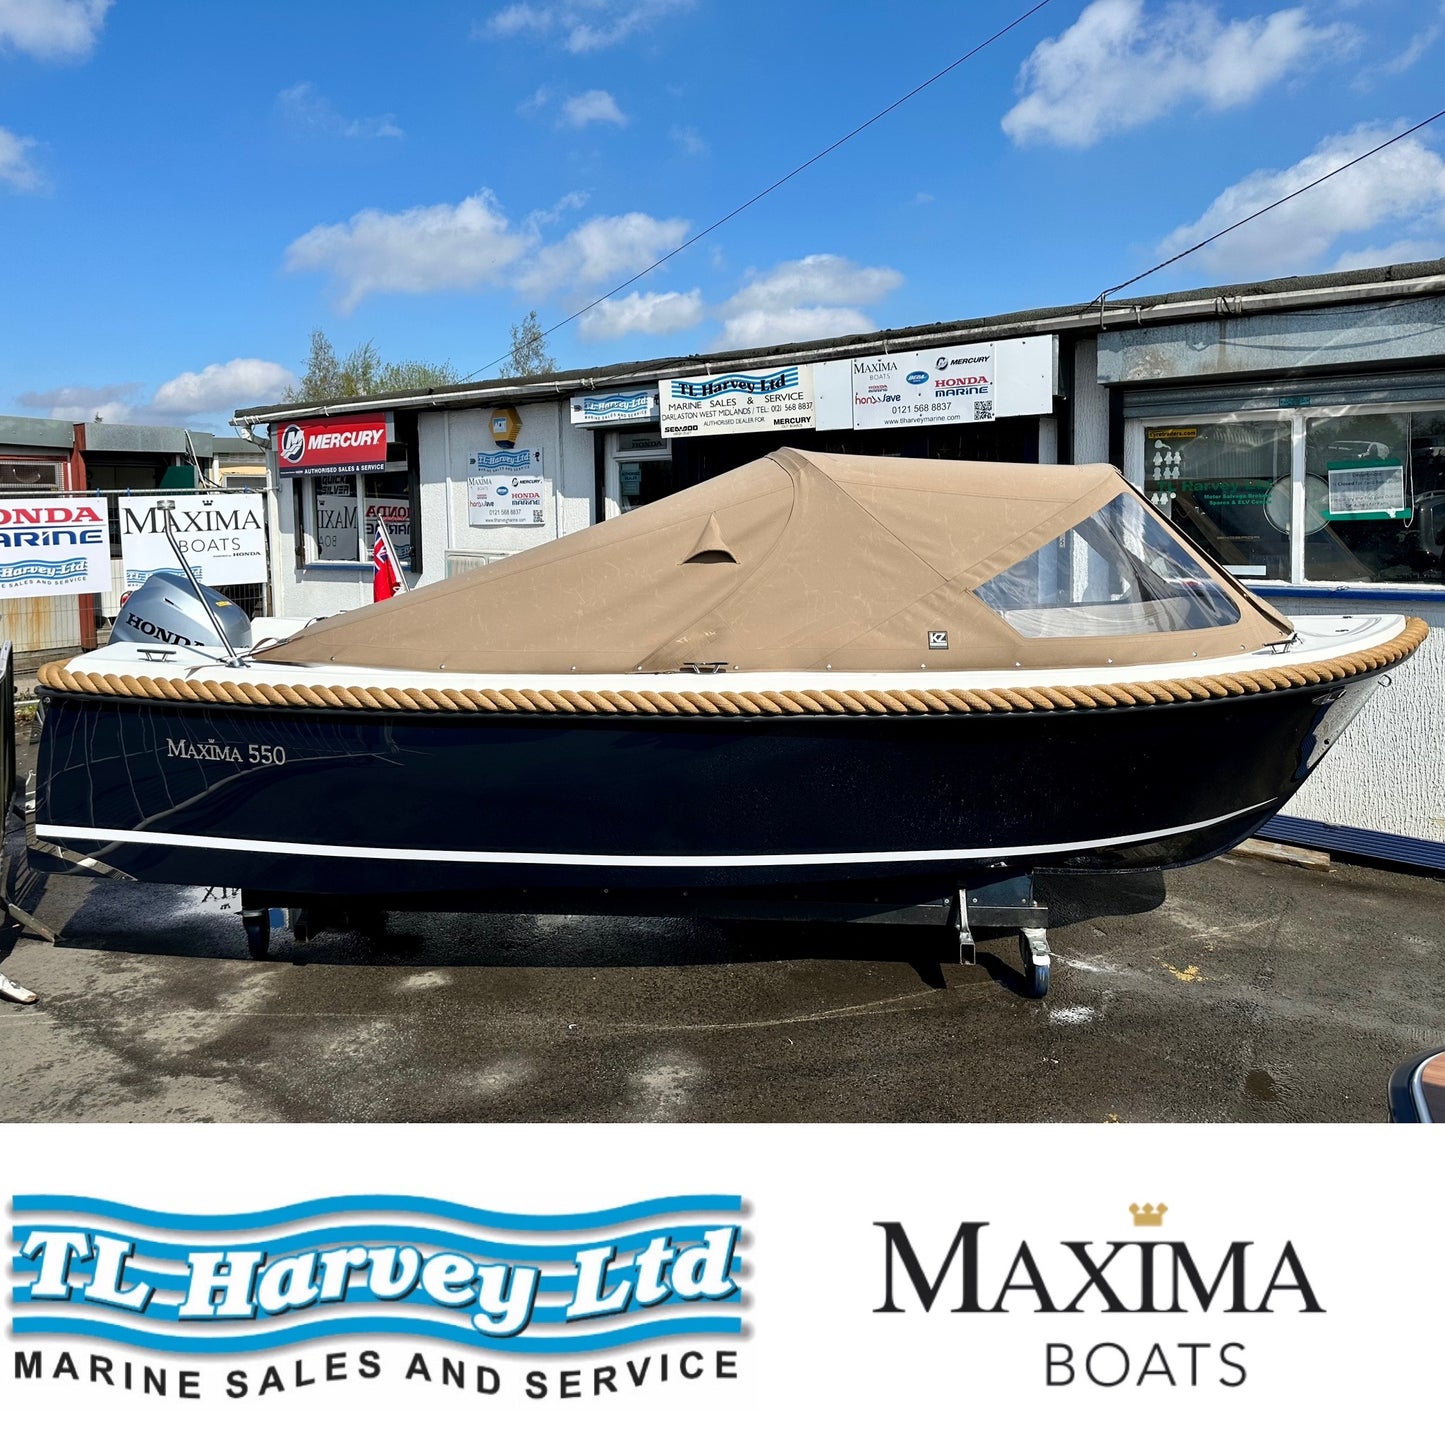 Maxima 550 Boat powered by Honda BF40 40hp In Stock Now